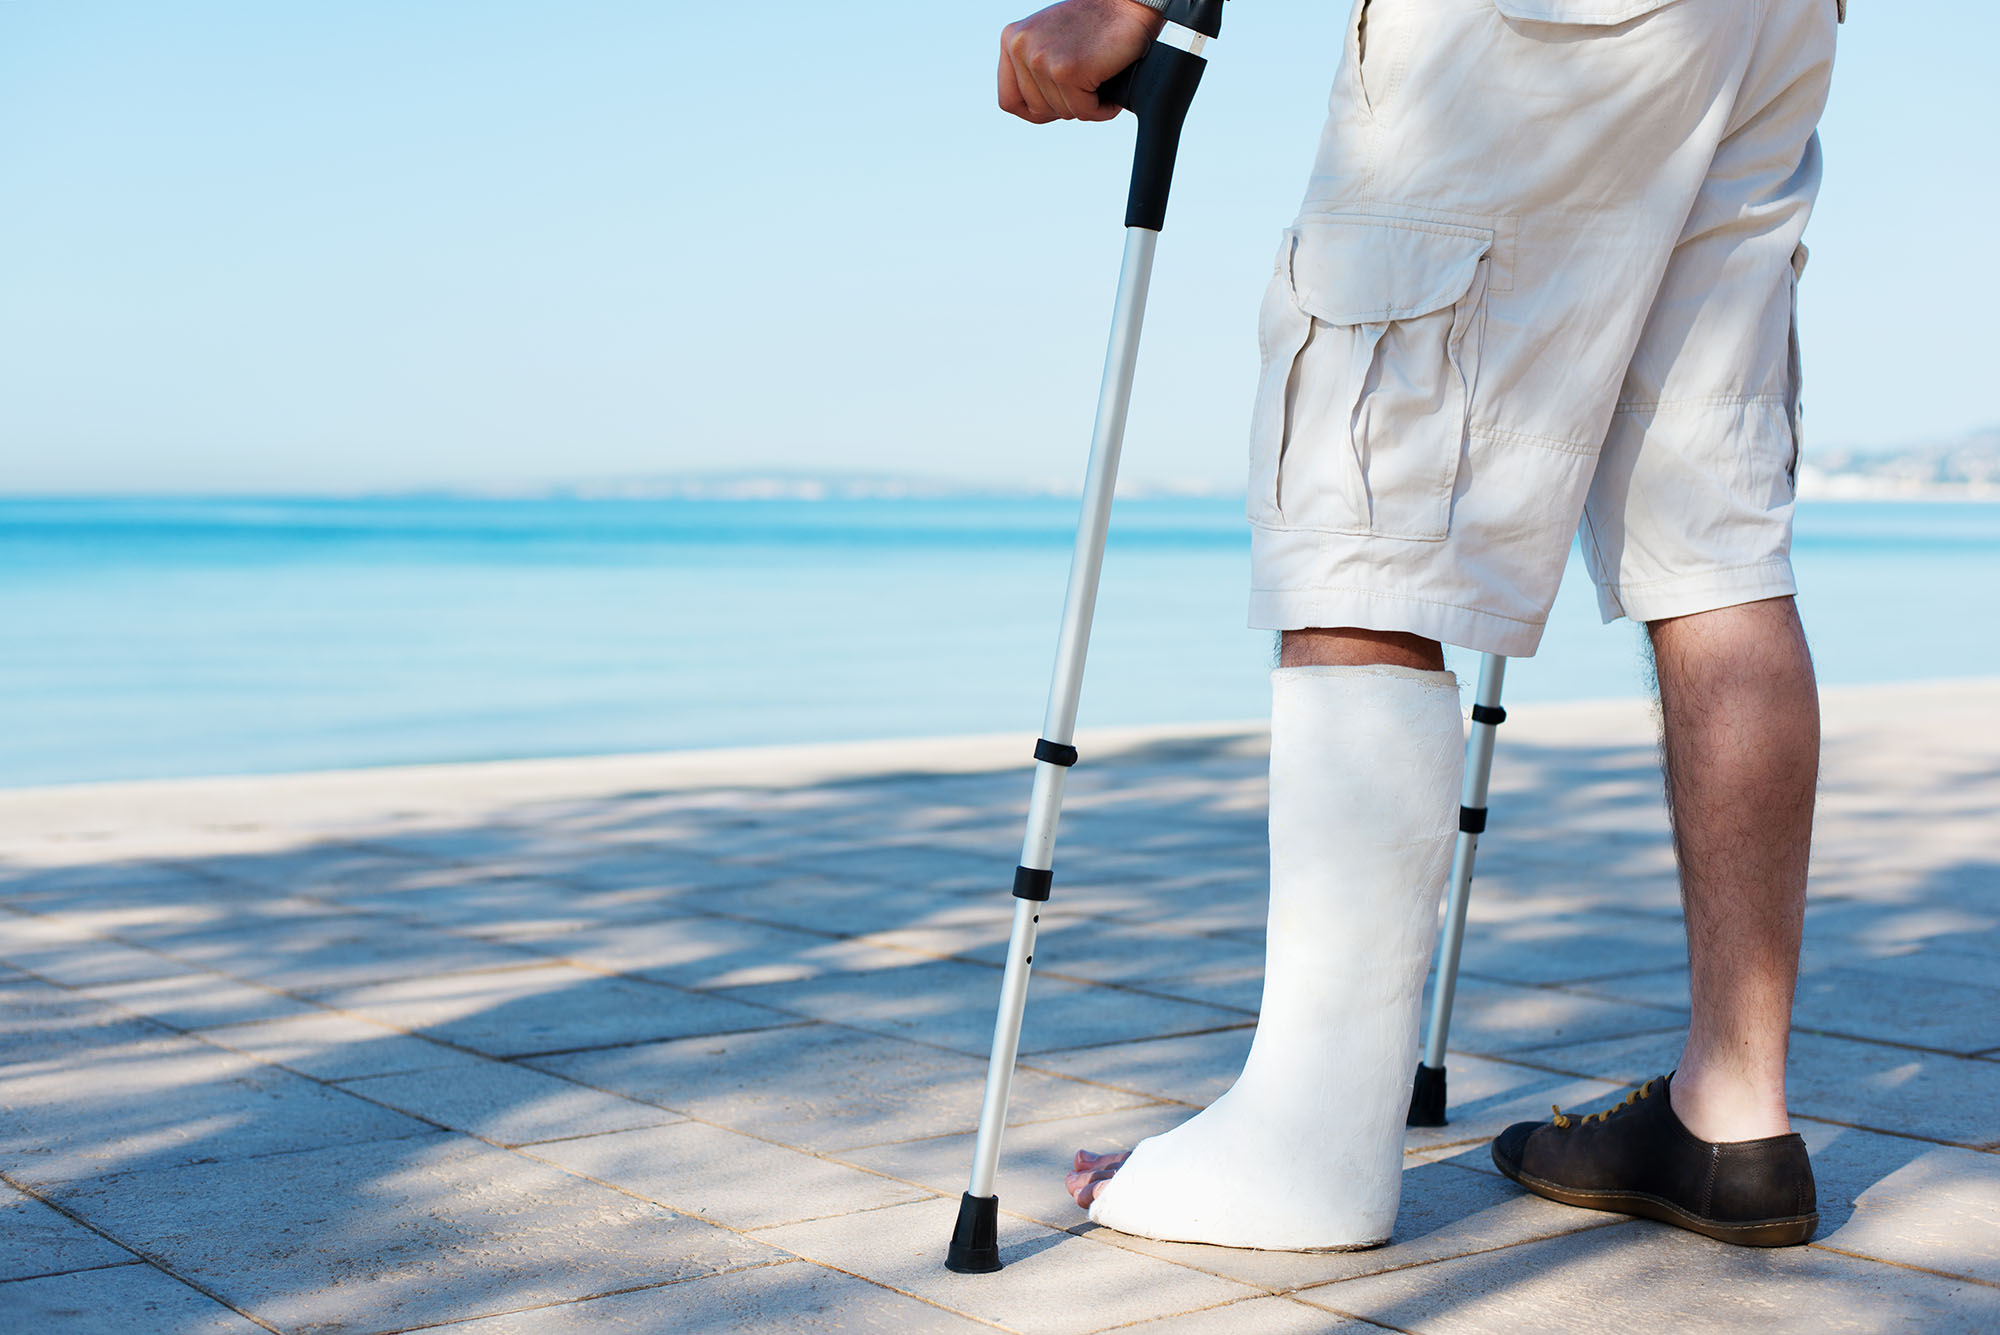 leg injury accident abroad compensation solicitors Bristol